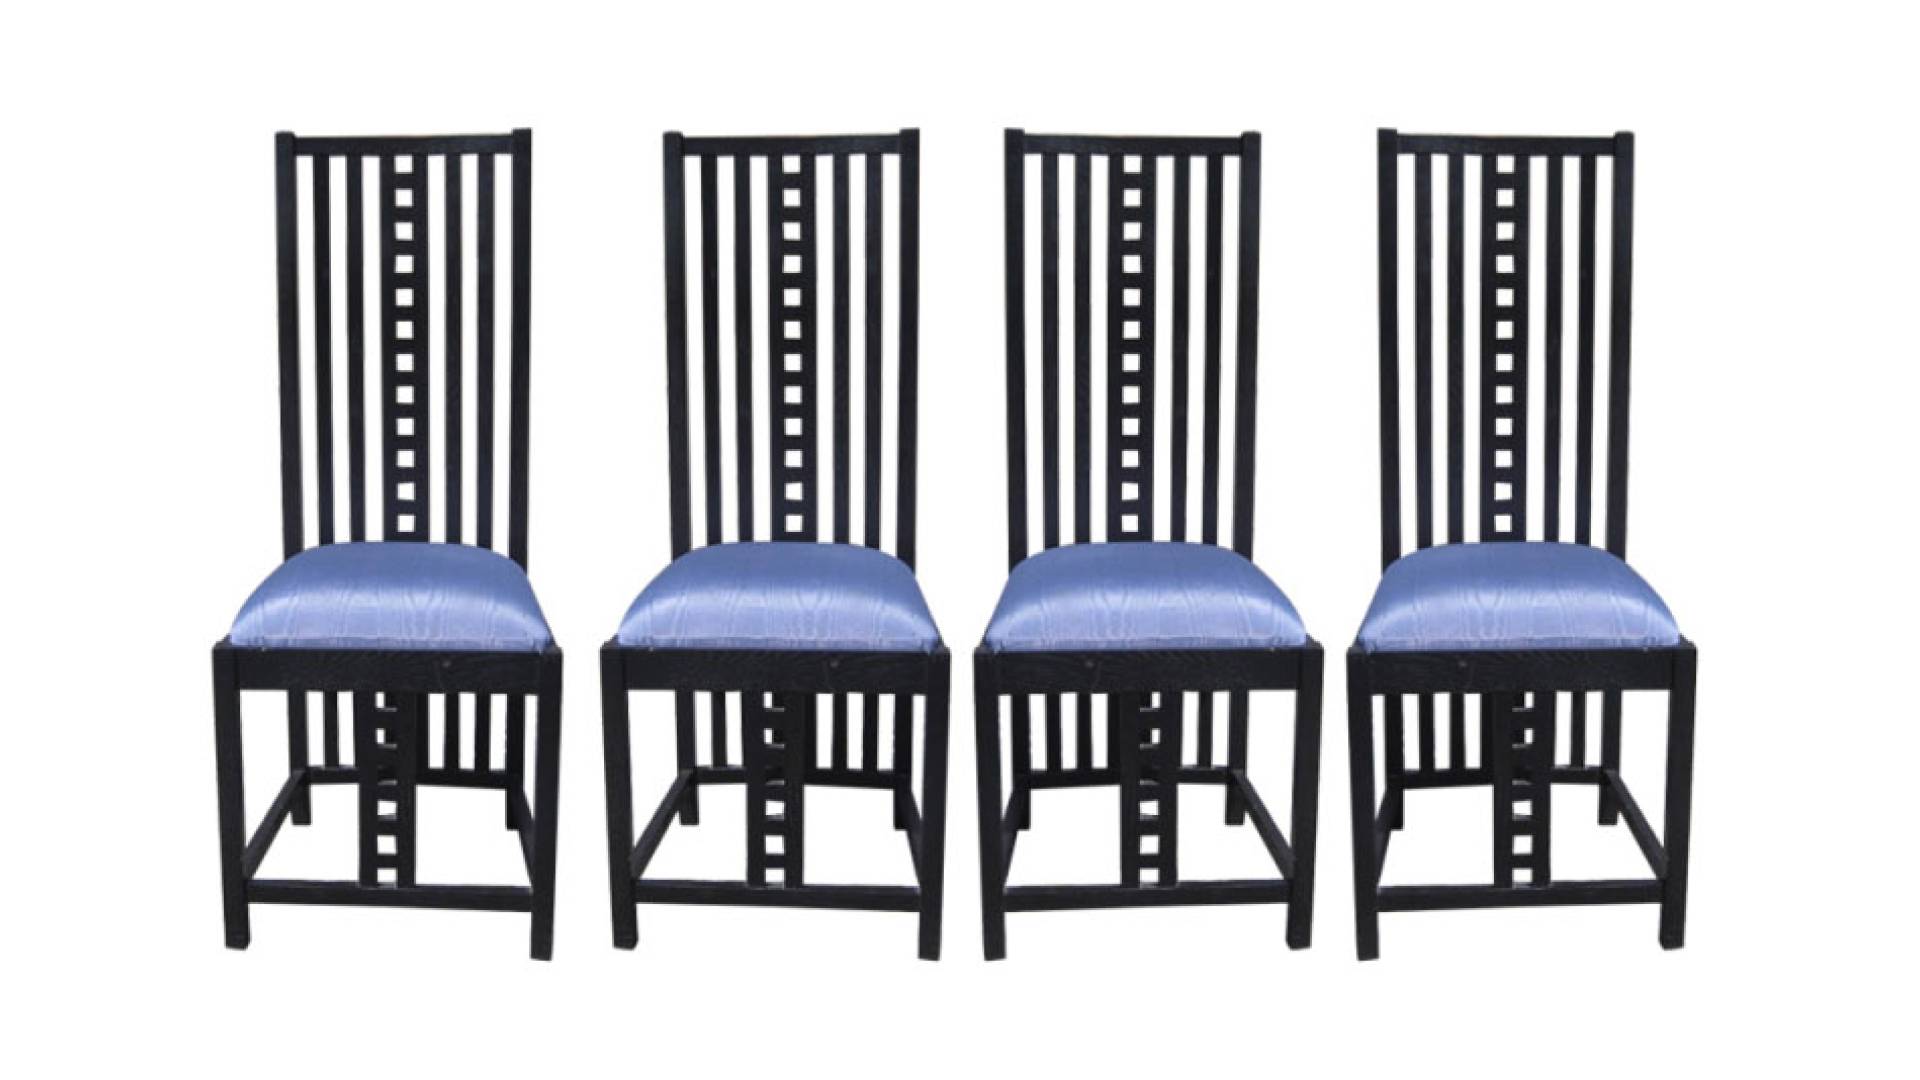 Wooden dining chairs with blue seat cushions made by Charles Mackintosh